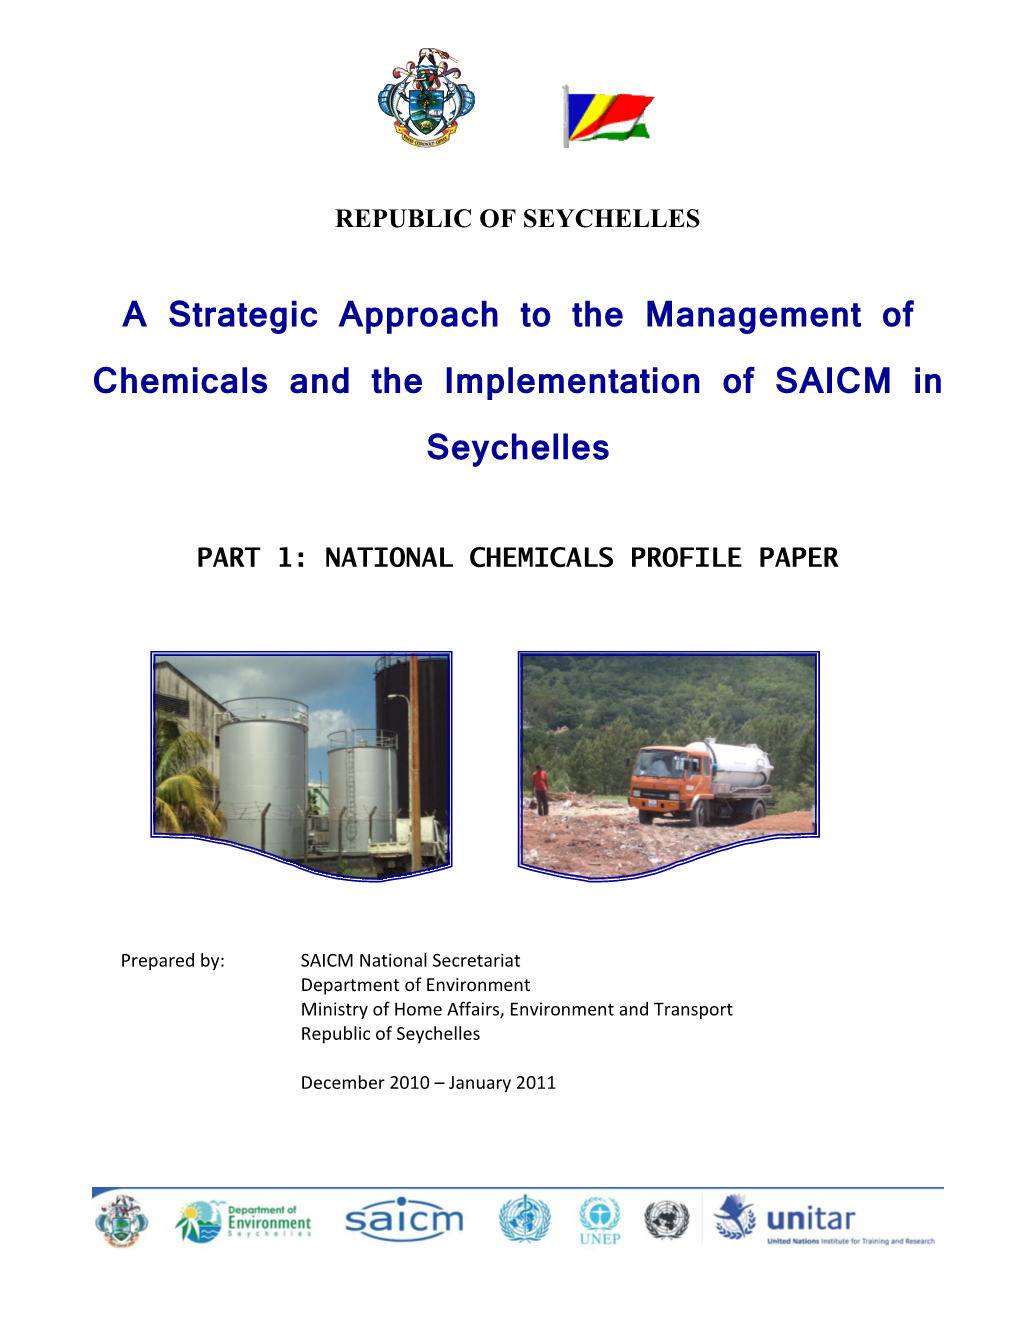 A Strategic Approach to the Management of Chemicals and the Implementation of SAICM in Seychelles